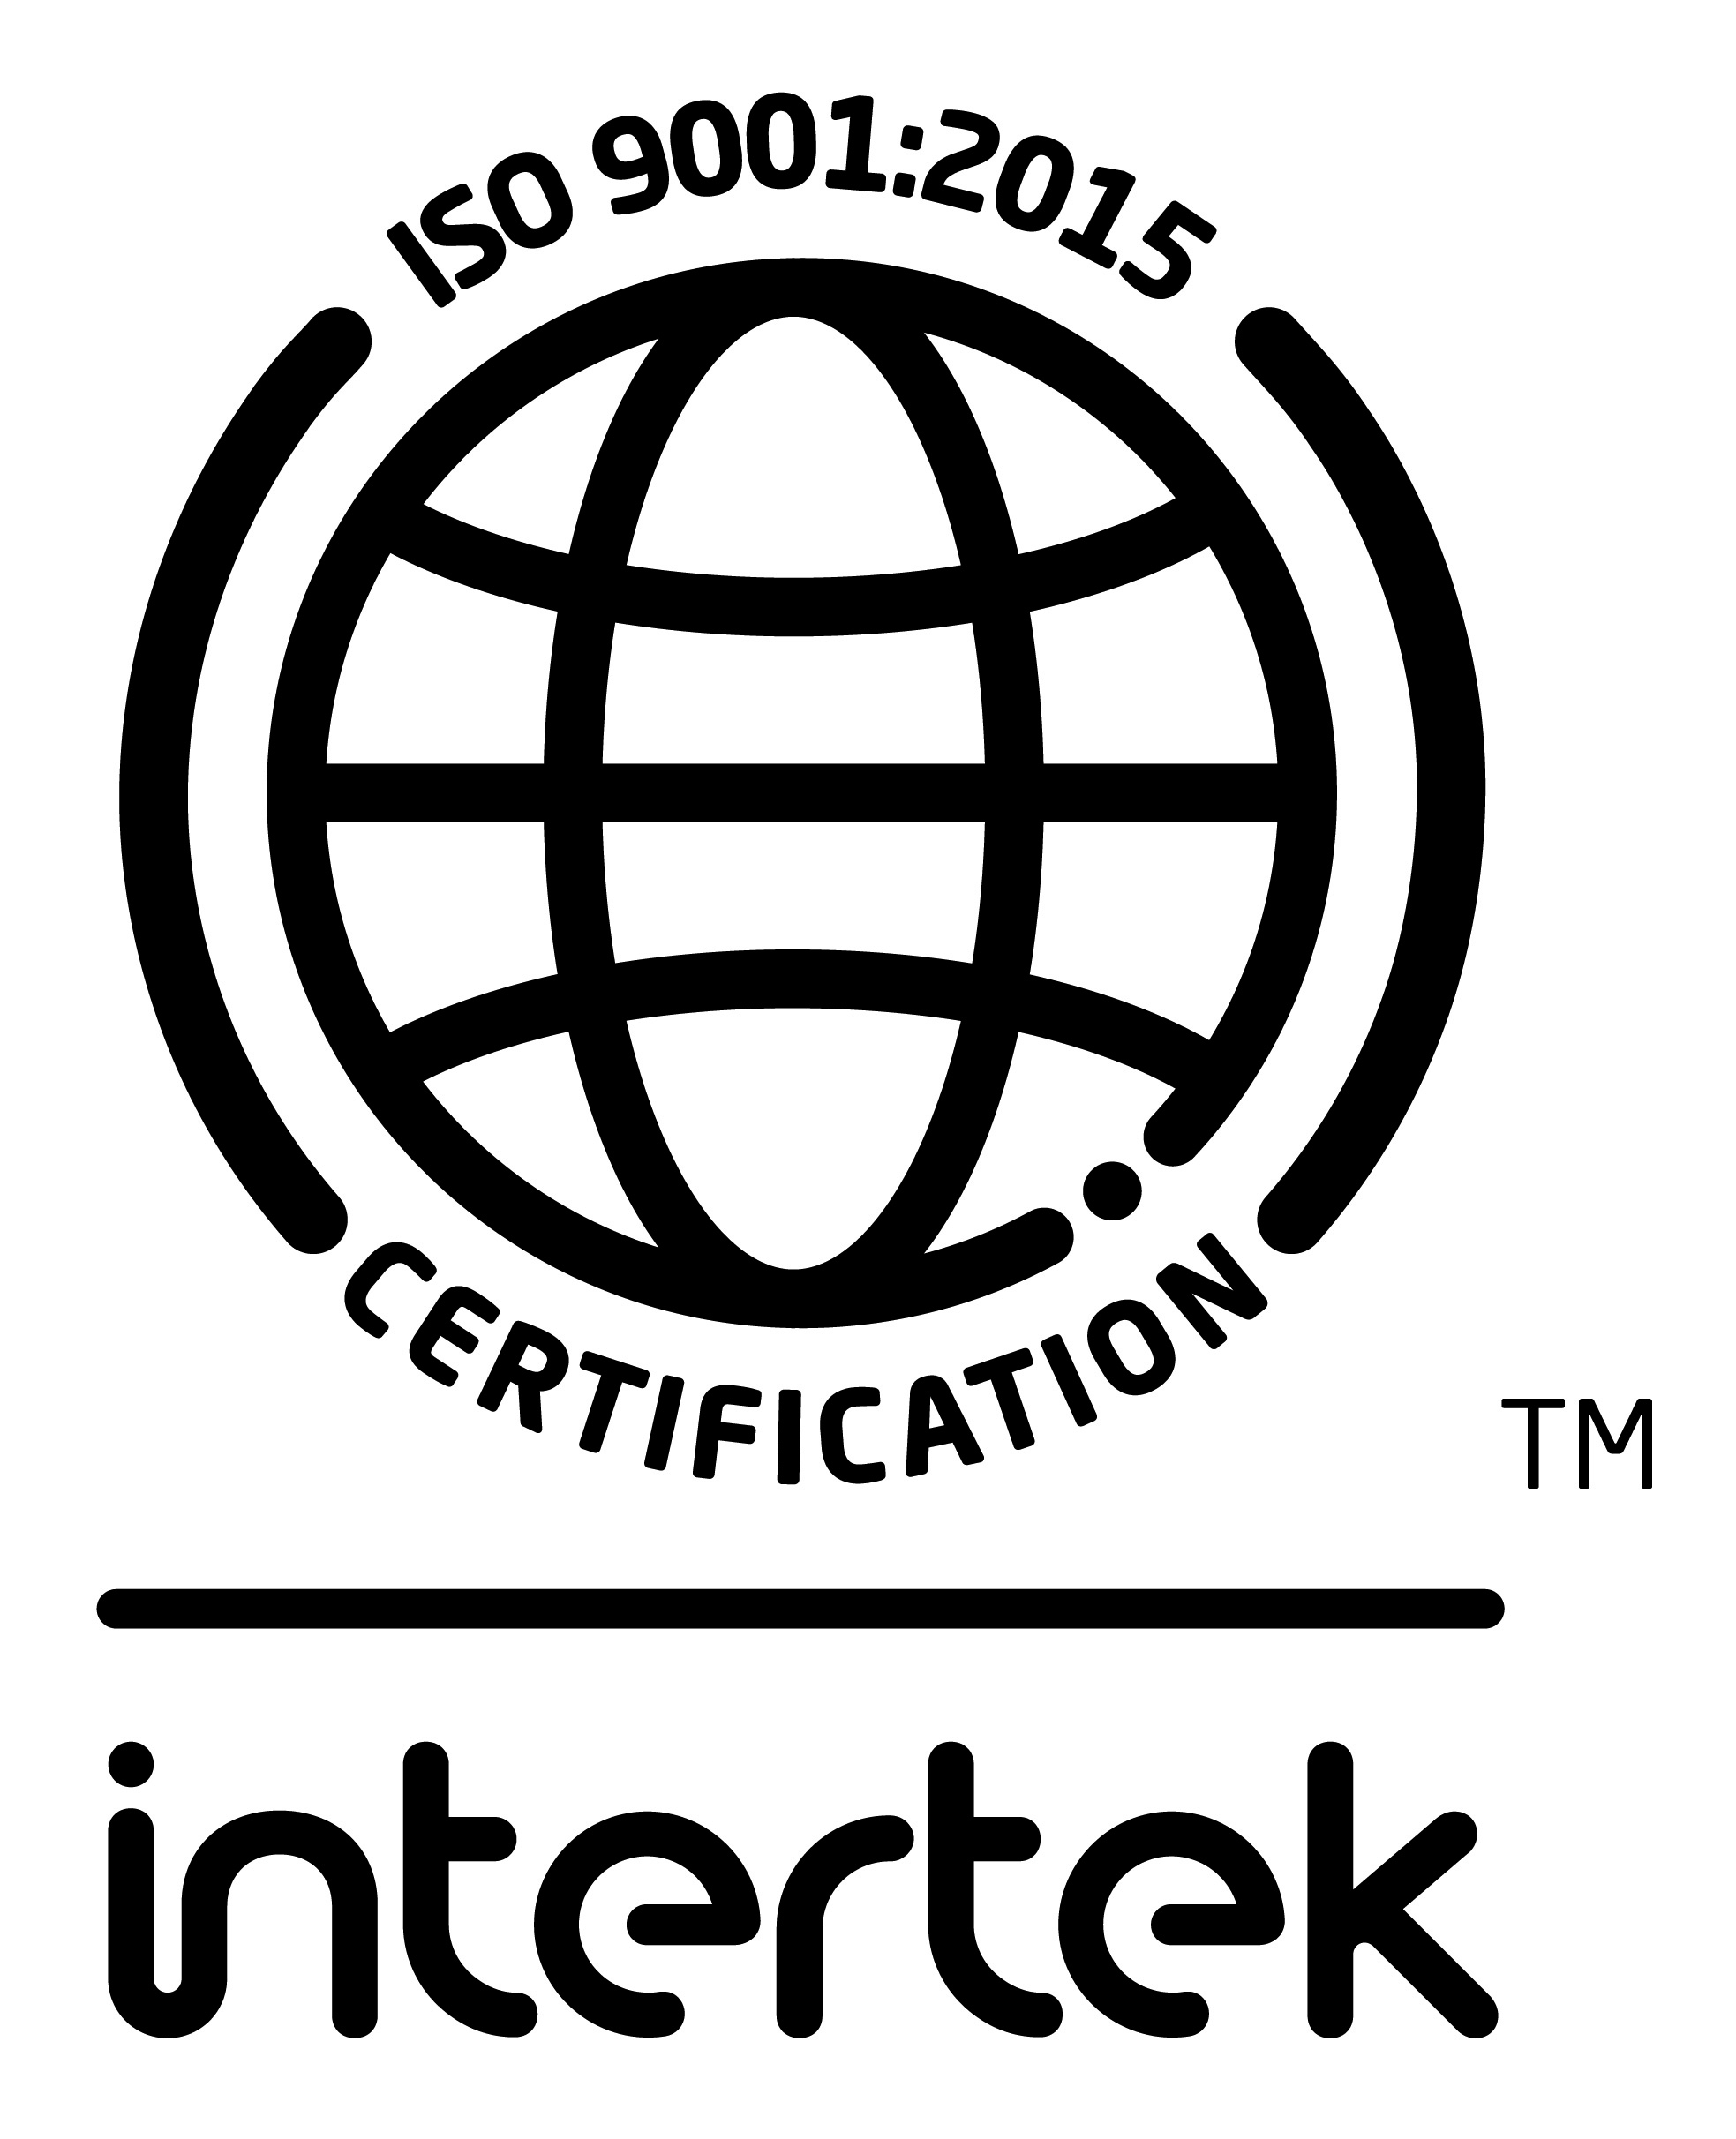 ISO Logo and a link to the C2C Certificate of Registration